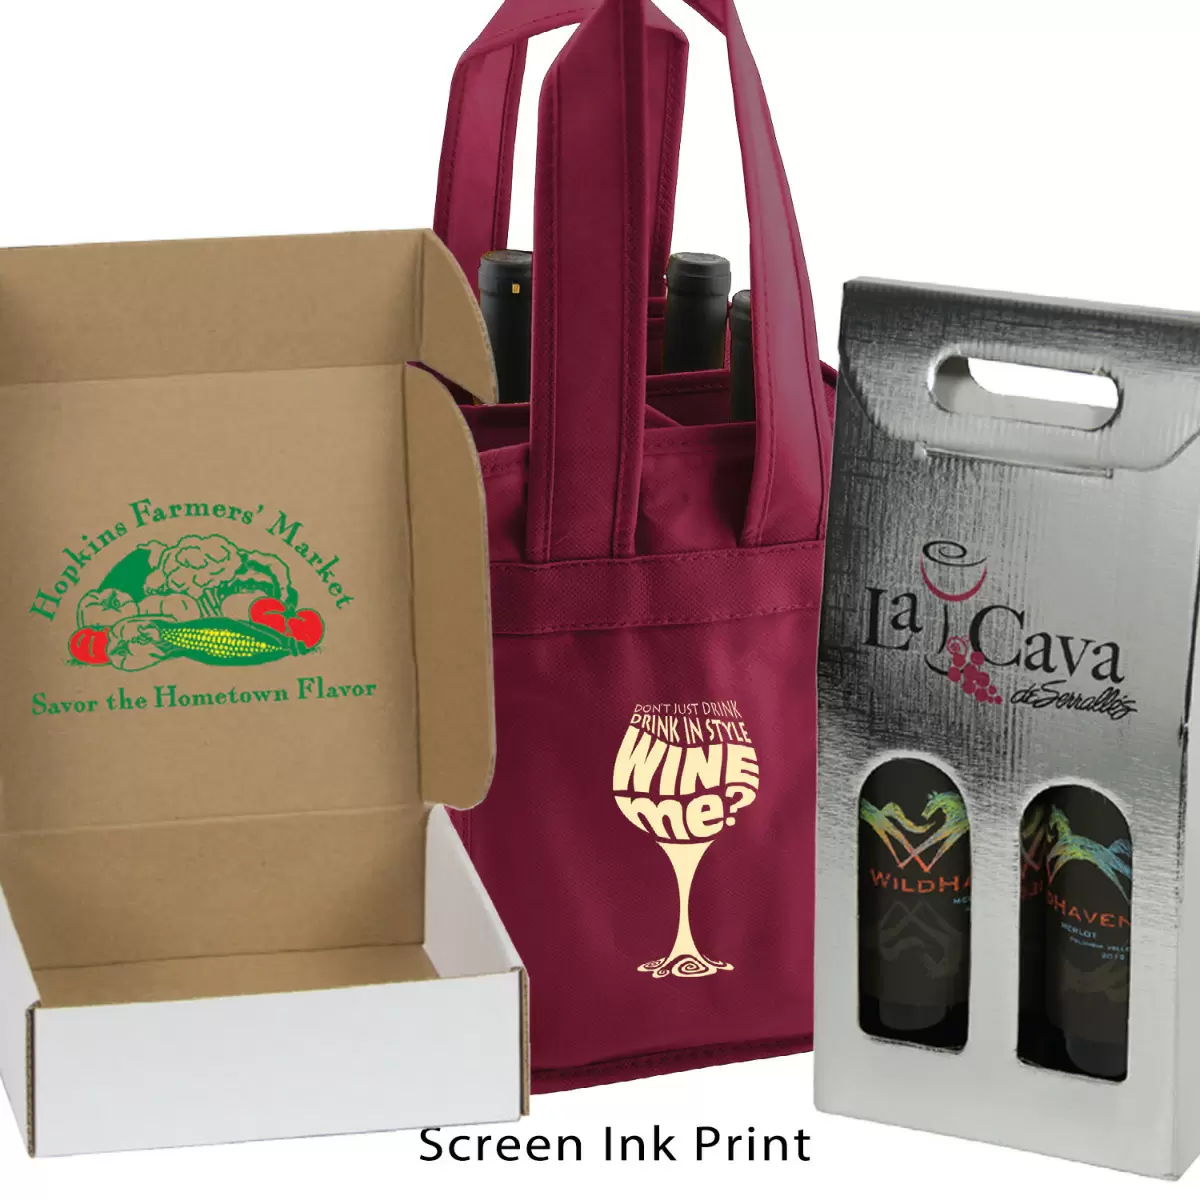 Screen Printng on Packaging Example